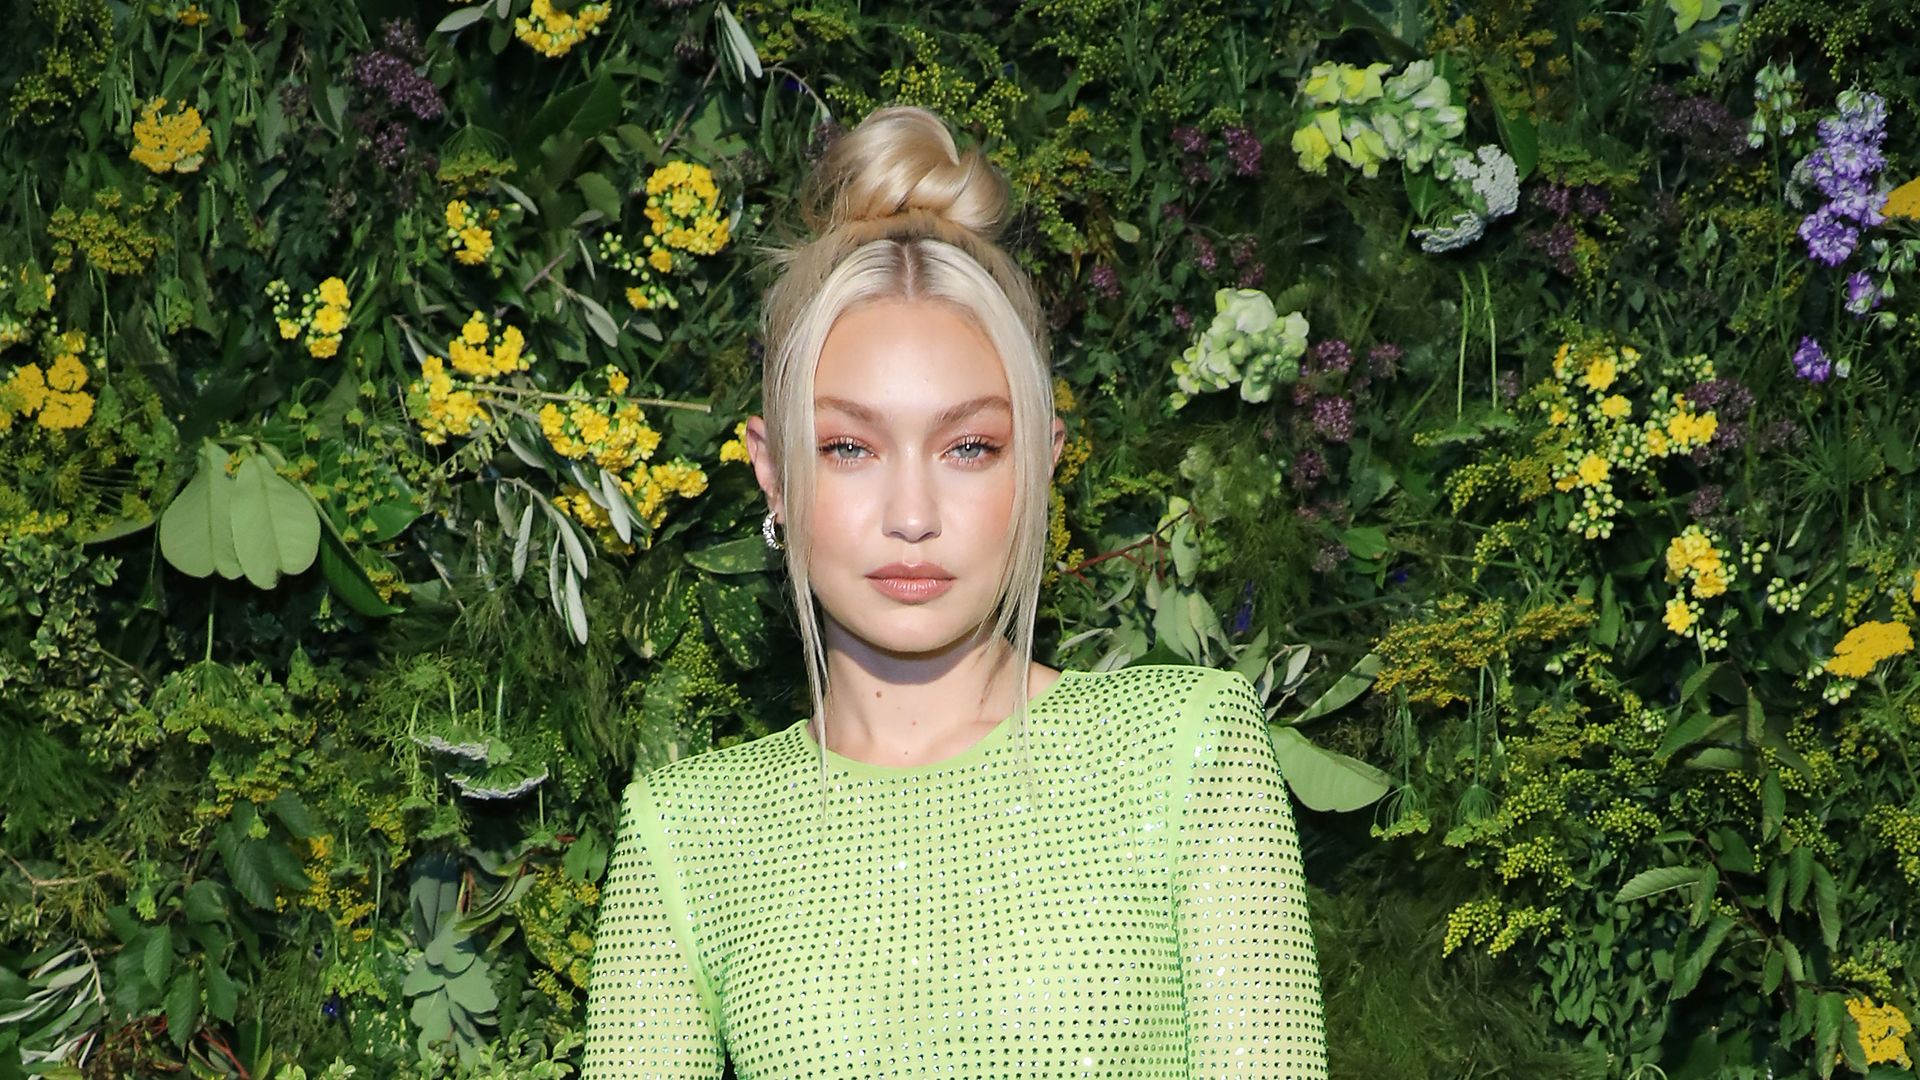 Gigi Hadid attends the British Vogue X Self-Portrait Summer Party at Chiltern Firehouse on July 20, 2022 in London, England